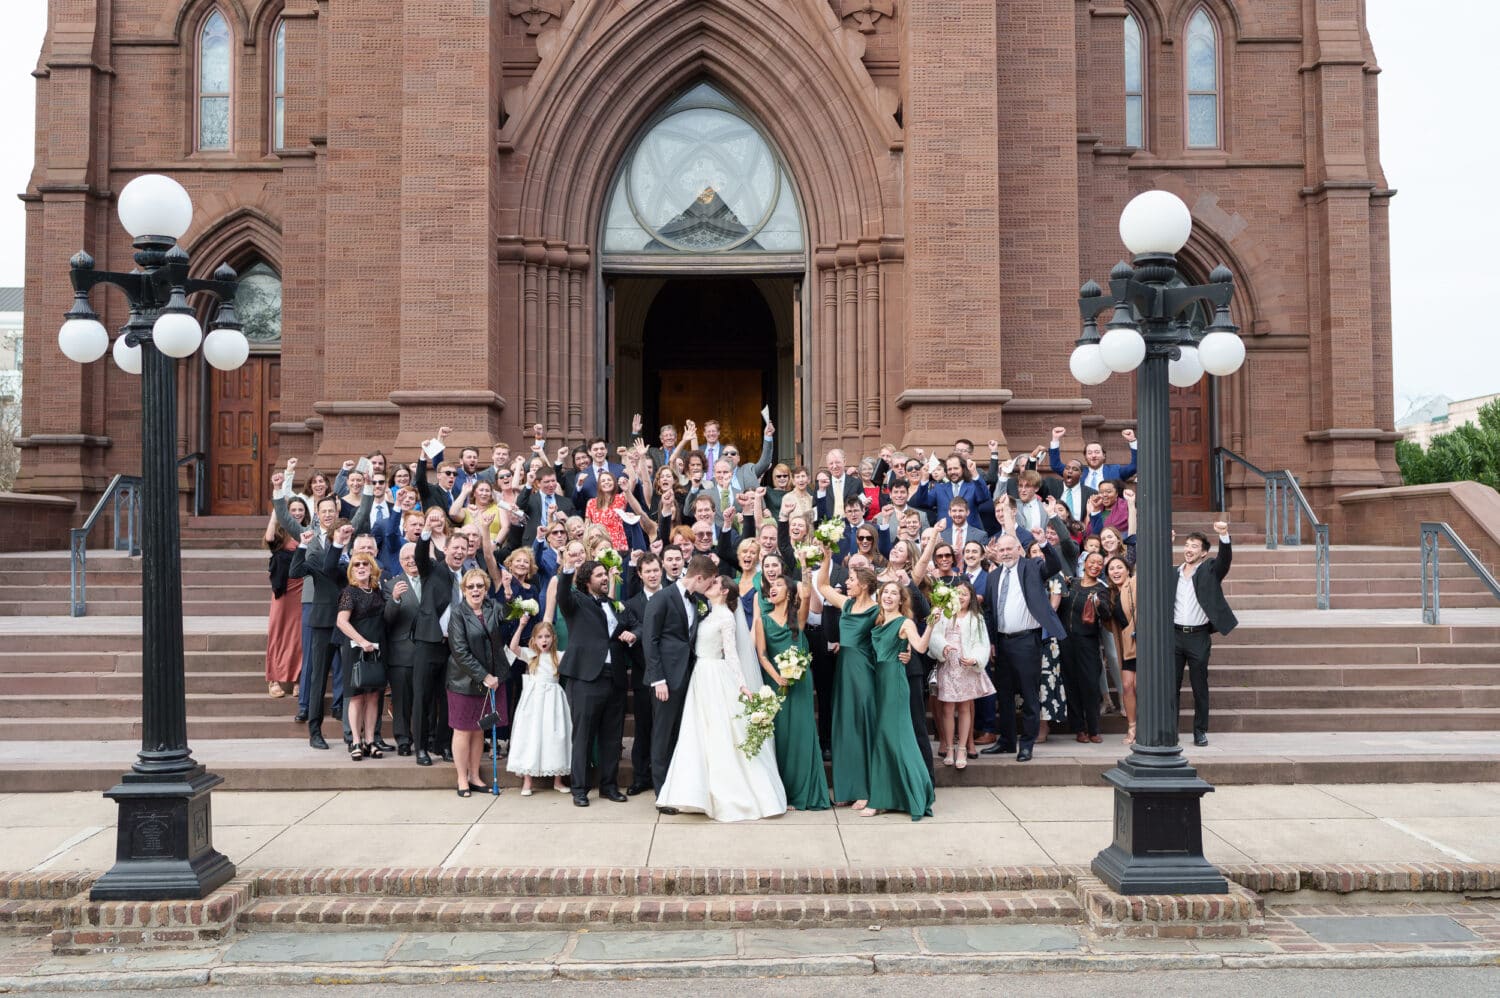 Big group picture outside the cathedral - Cathedral of Saint John Charleston